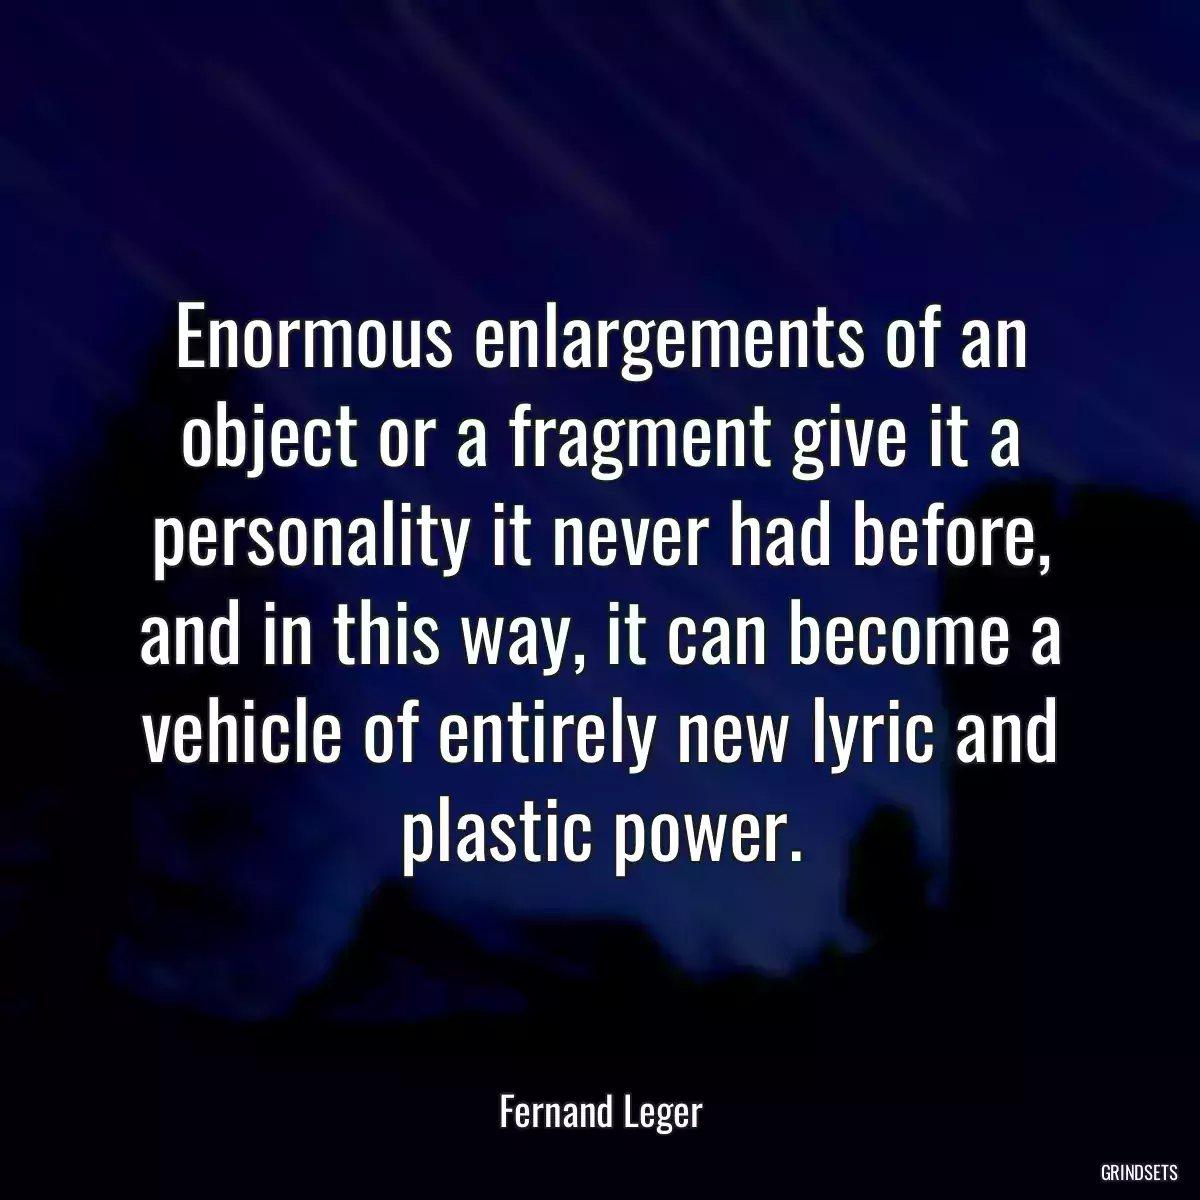 Enormous enlargements of an object or a fragment give it a personality it never had before, and in this way, it can become a vehicle of entirely new lyric and plastic power.